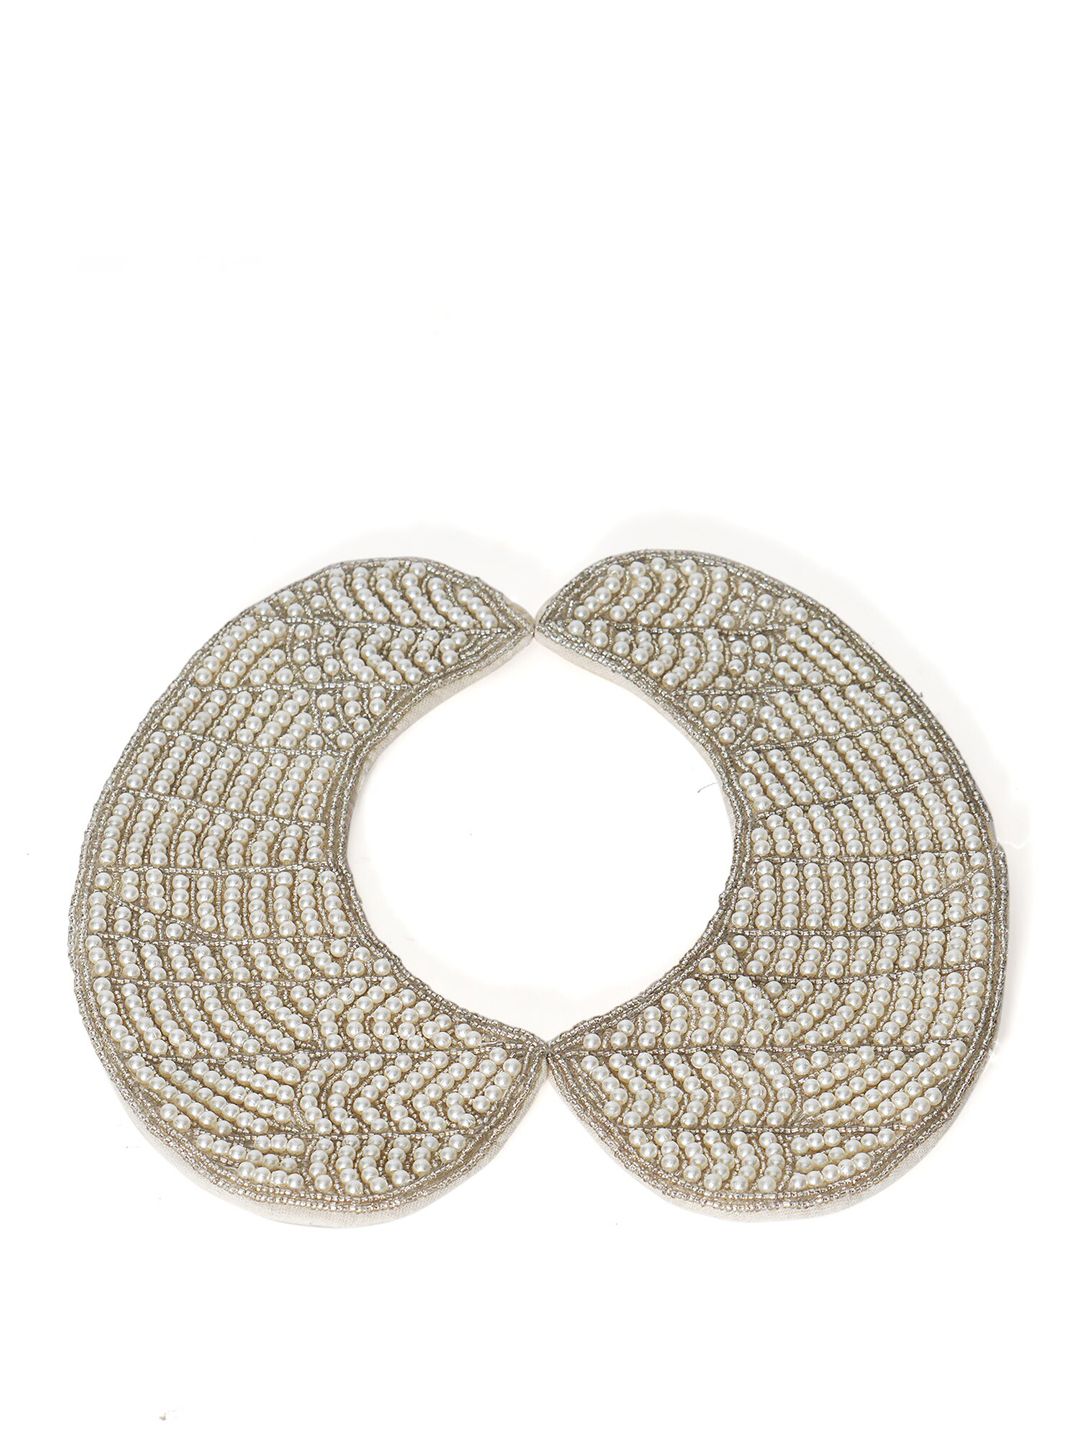 Diwaah Off White & Silver Zerro Embellished Necklace Price in India